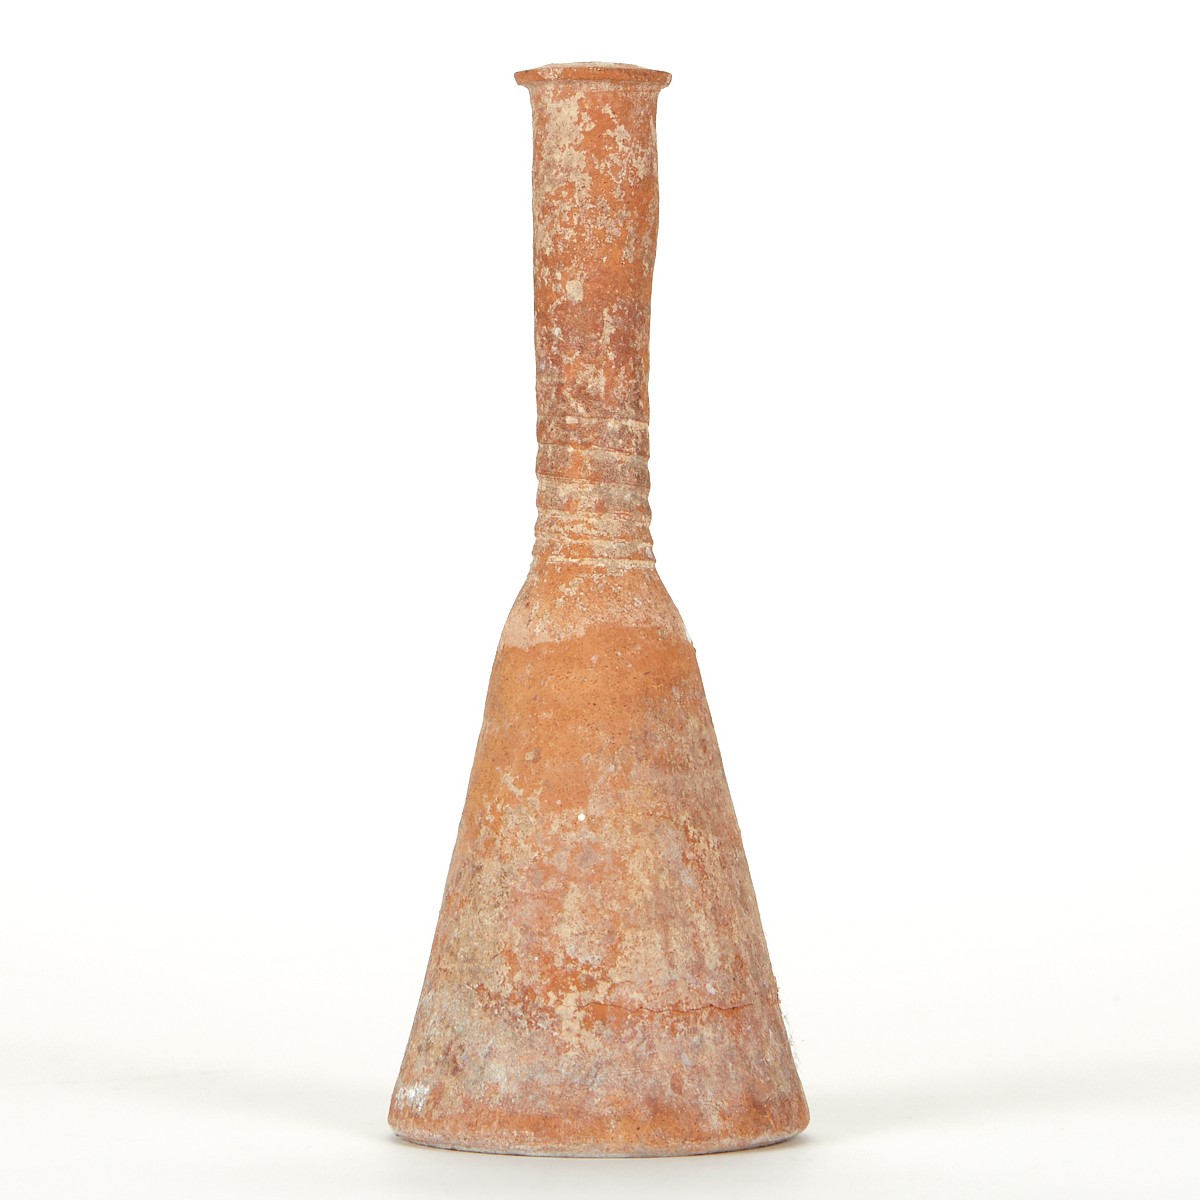 Long Necked Bell Shaped Ceramic - Image 3 of 6